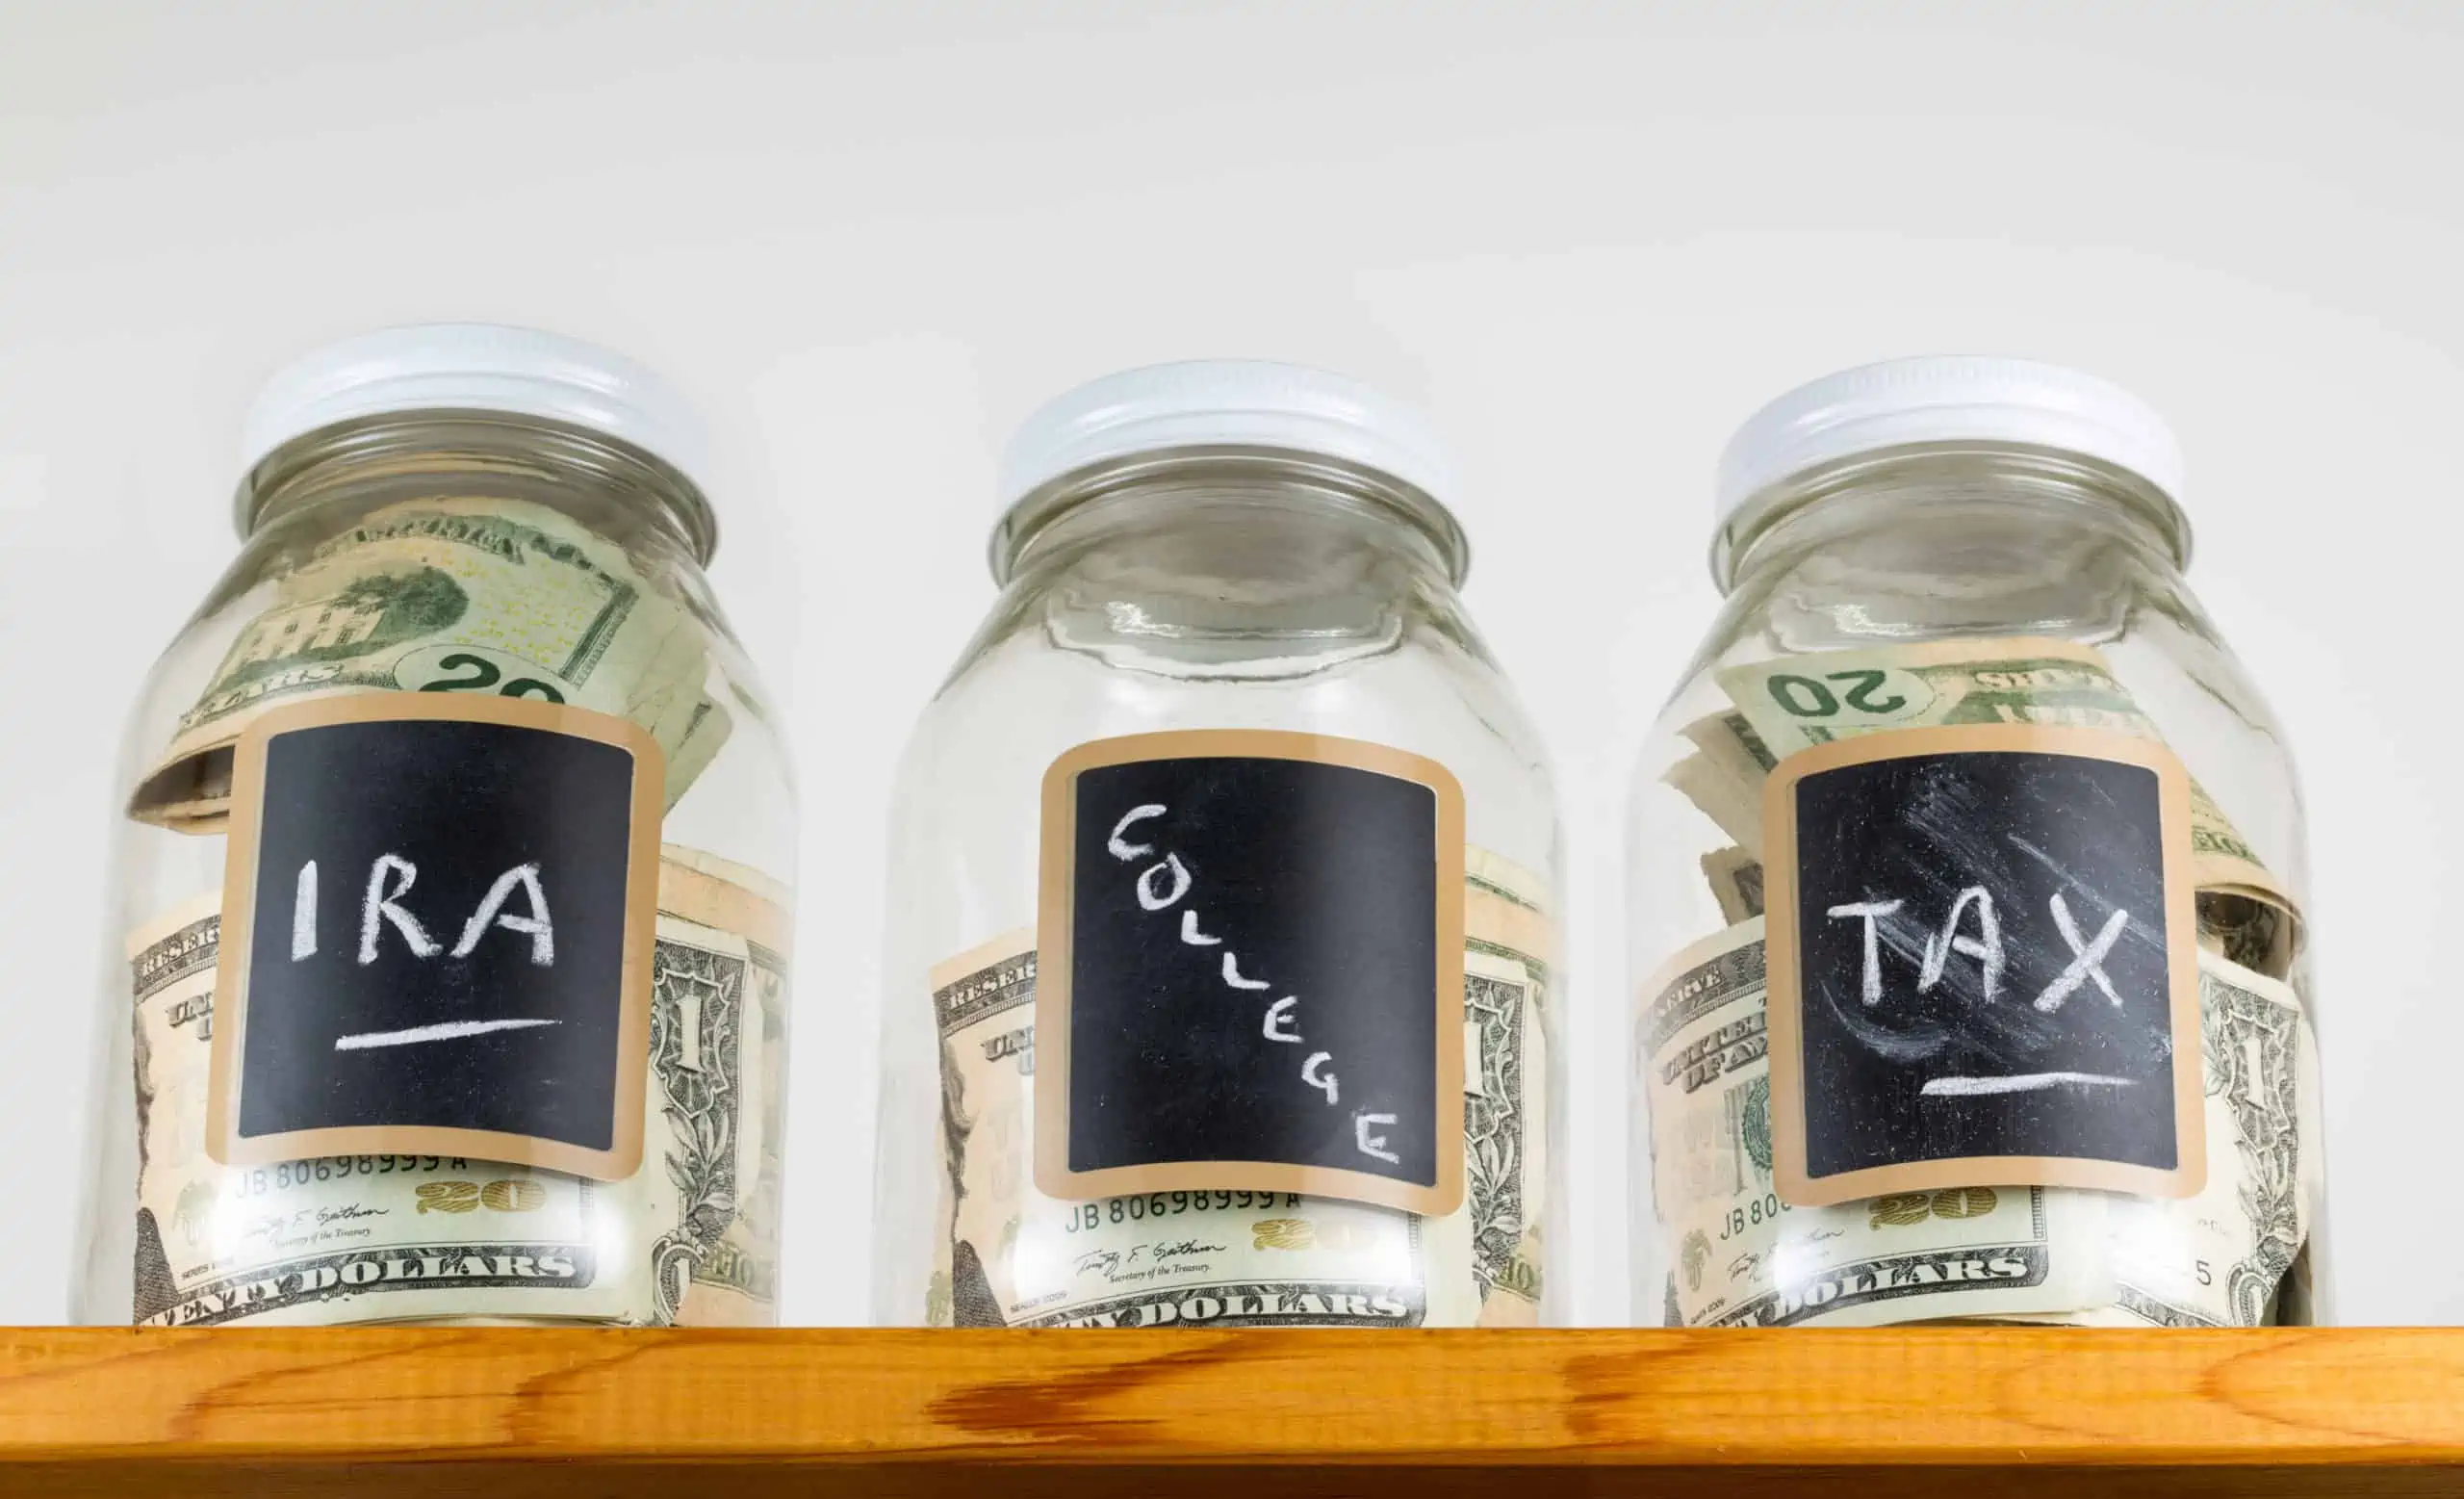 Three glass jars with chalk labels used for saving US dollar bills and notes for IRA, tax and college funds.